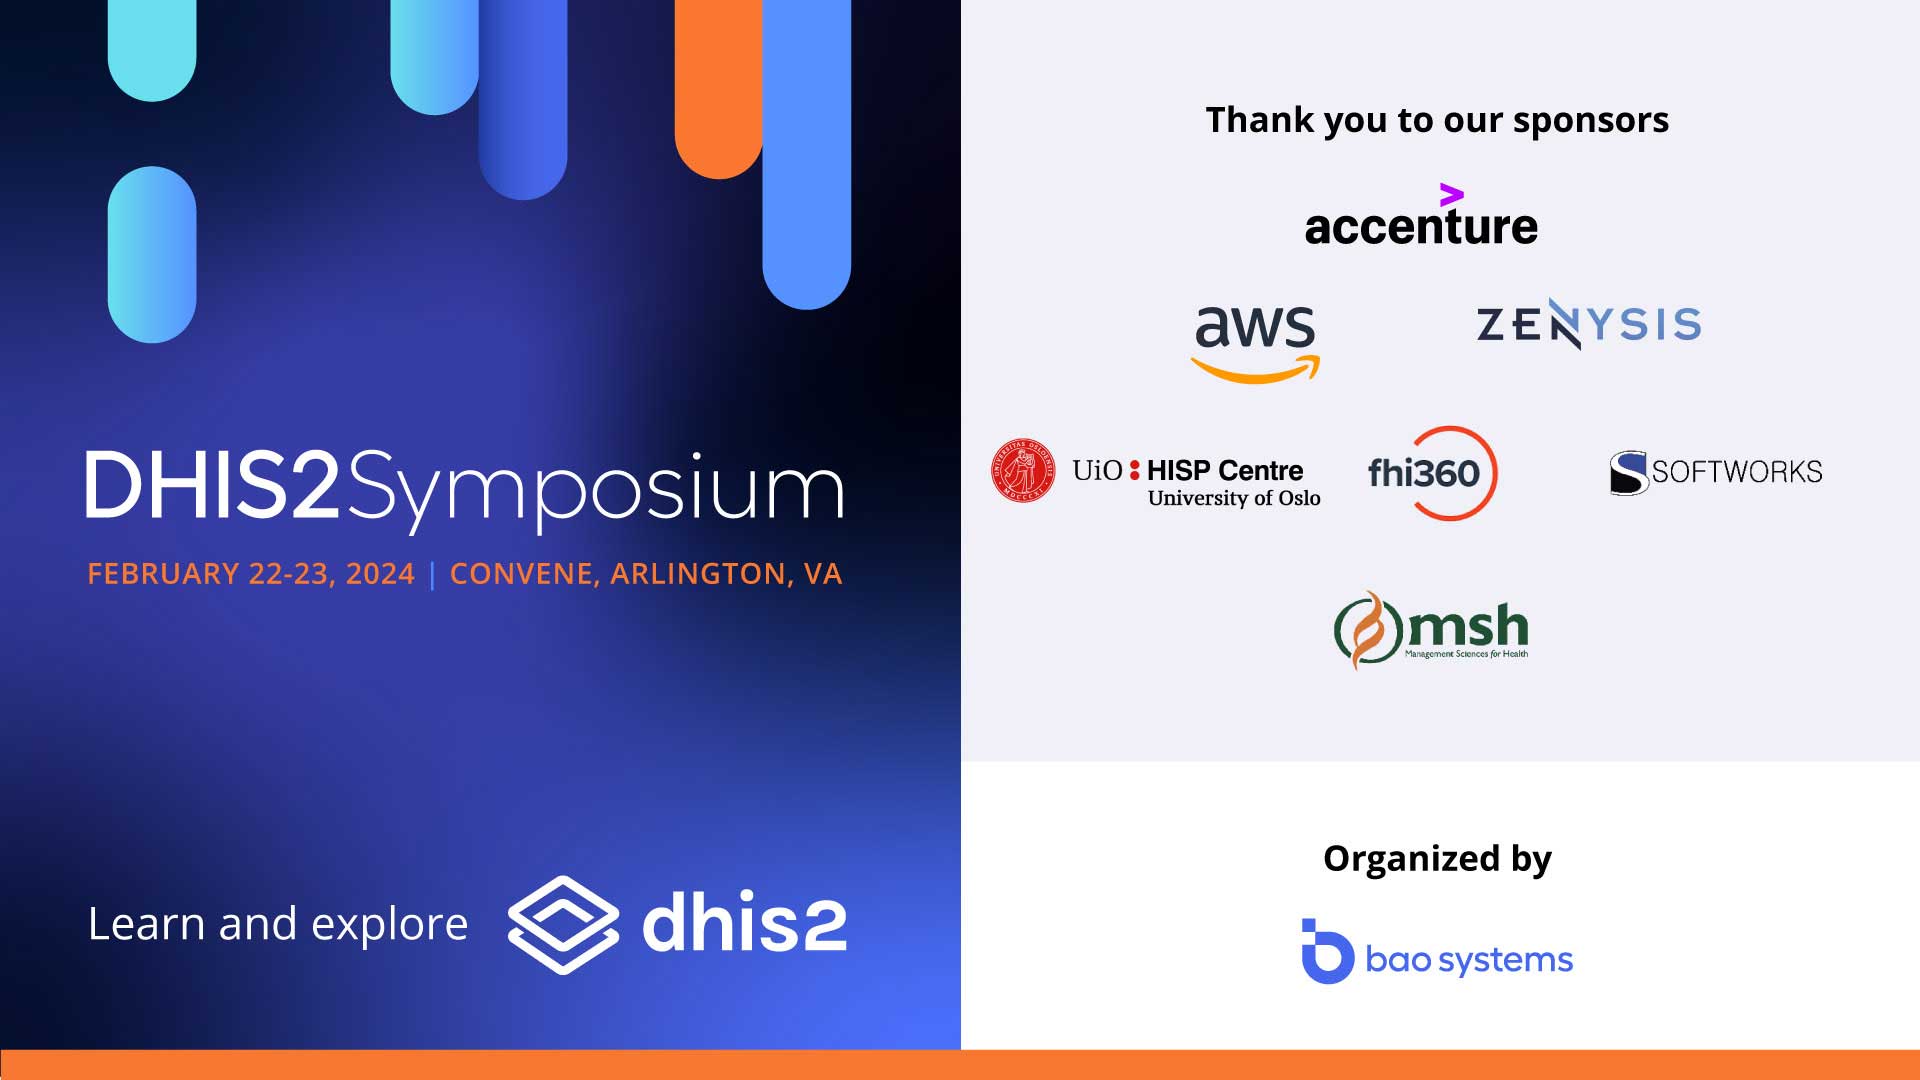 DHIS2 Symposium 2024 USA As Sponsor And Exhibitor